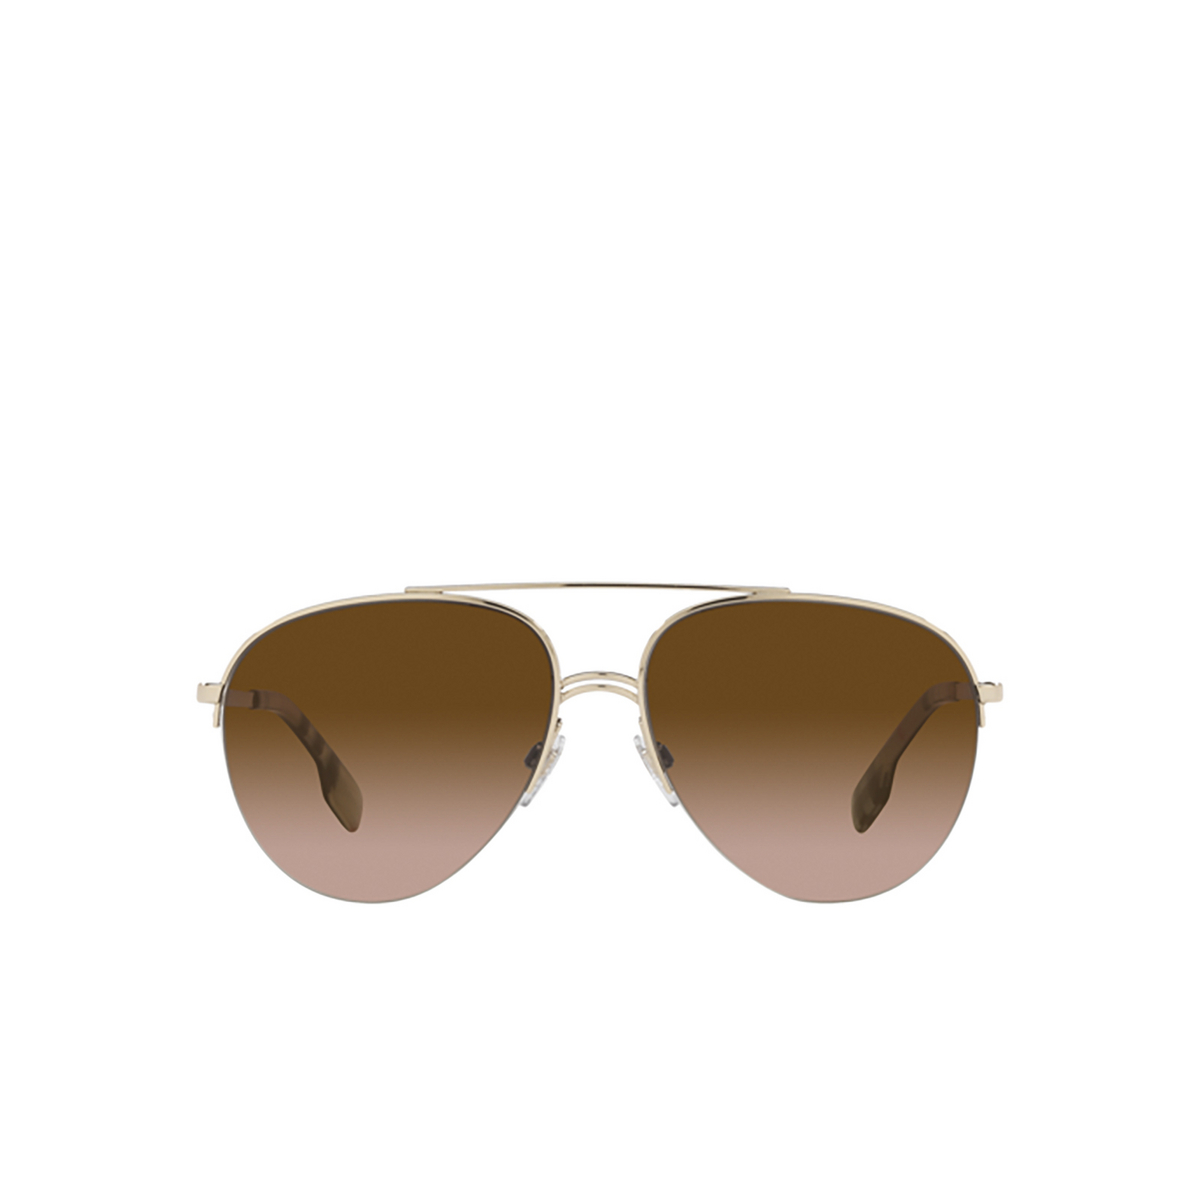 Burberry FERRY Sunglasses 132513 Light Gold - front view